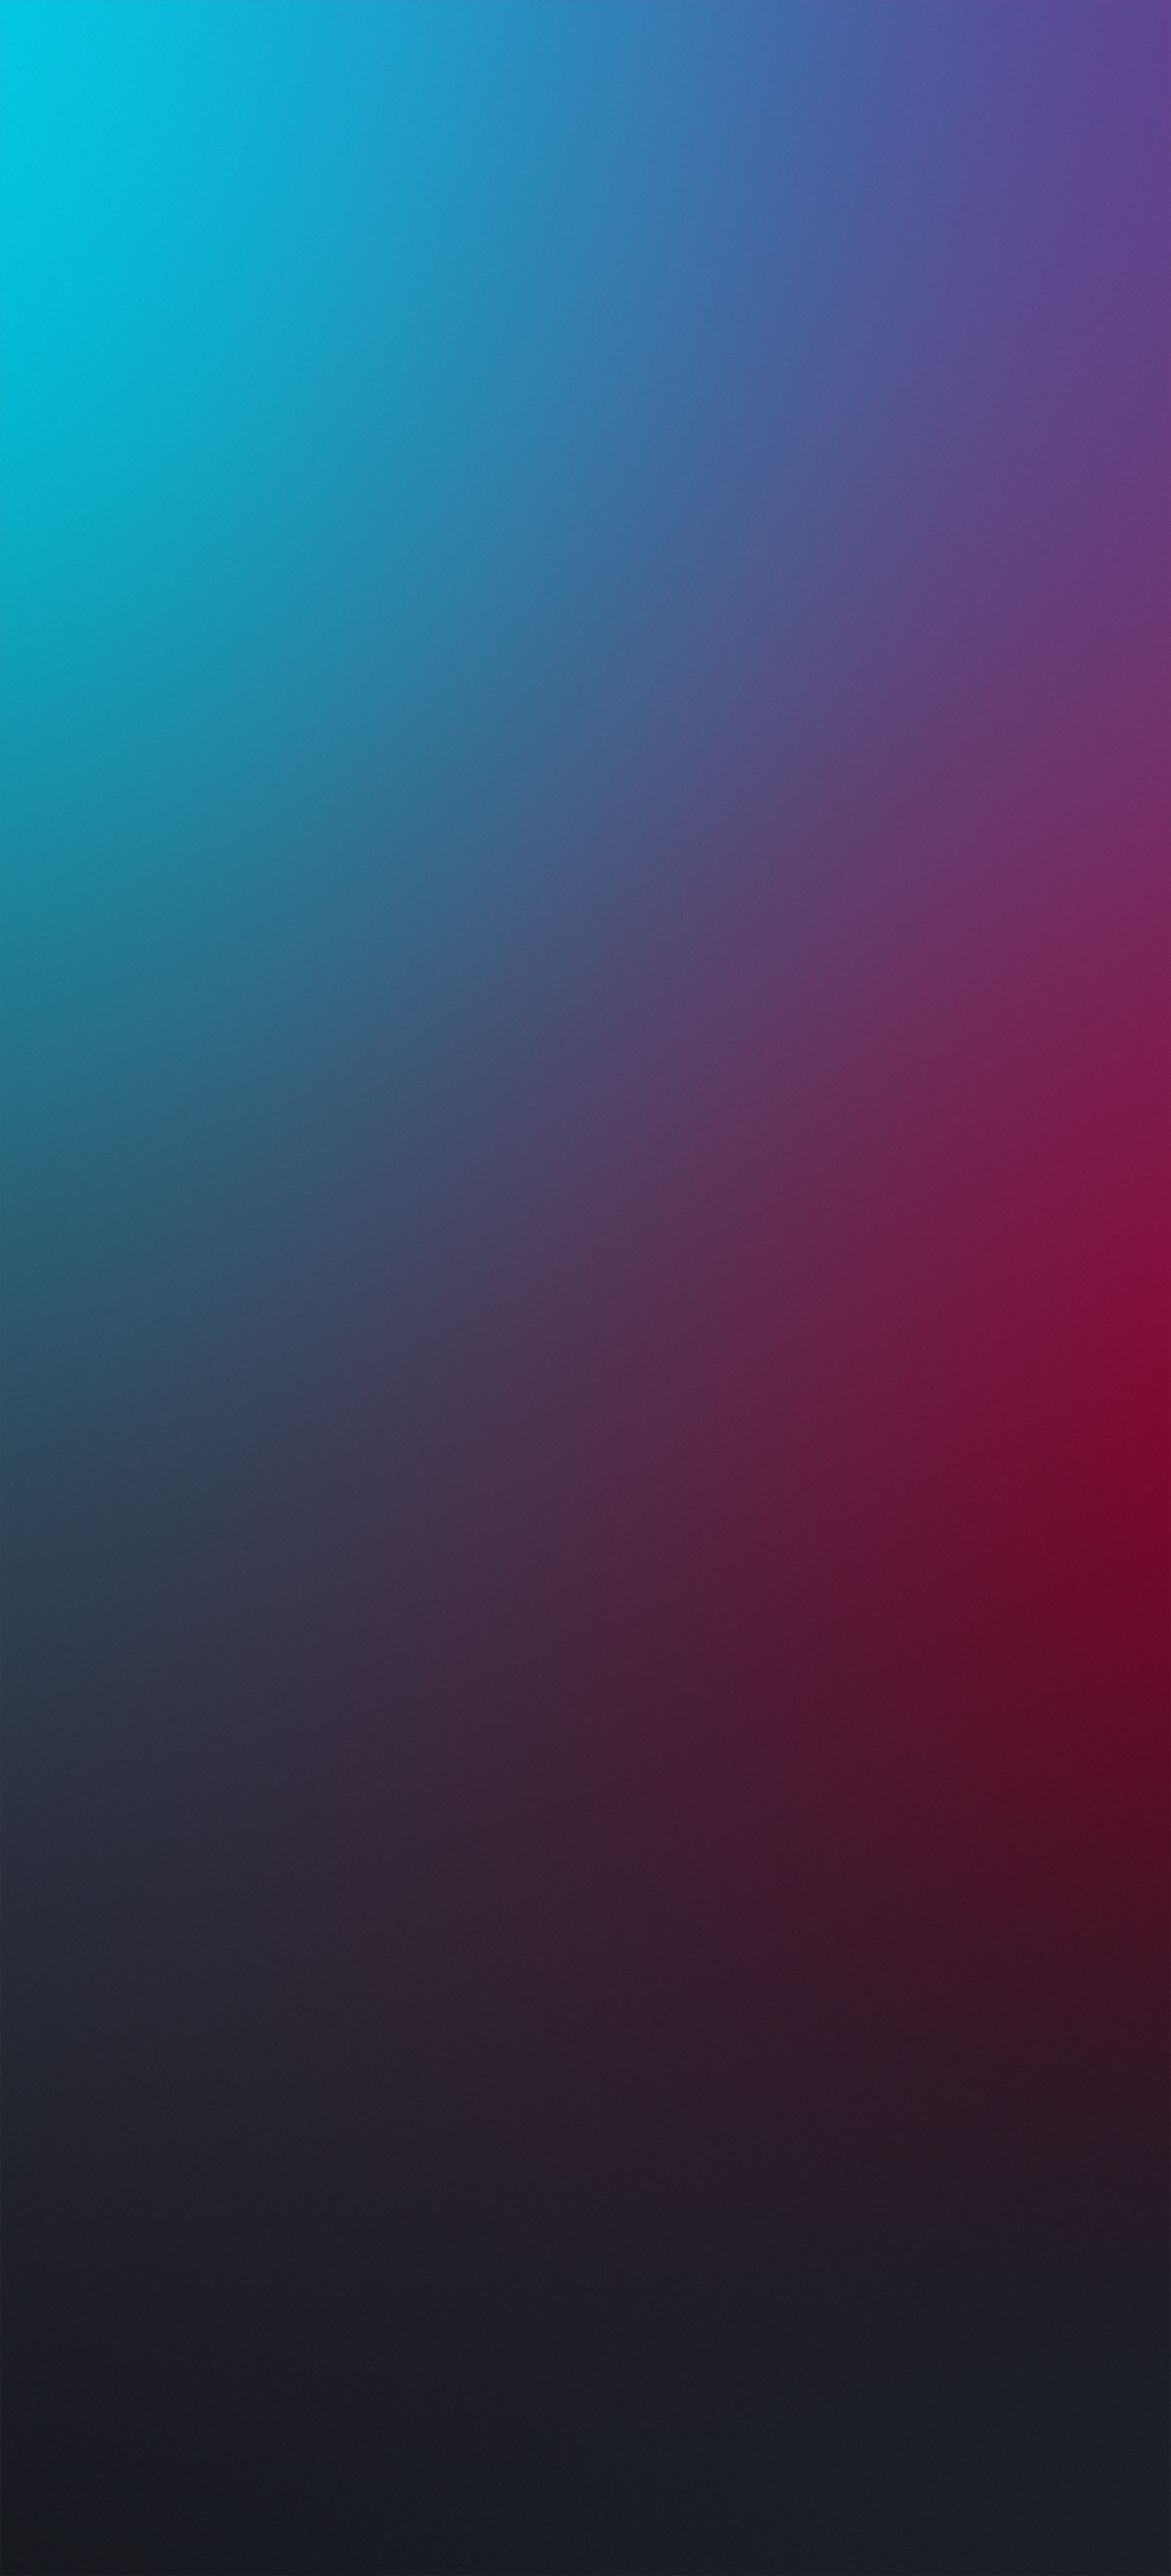 Free download iOS 14 Wallpaper in 2020 Blue background image Red wallpaper [1440x3168] for your Desktop, Mobile & Tablet. Explore iOS 14 Wallpaper. Mini 14 Wallpaper, F 14 HD Wallpaper, FCB Wallpaper 14